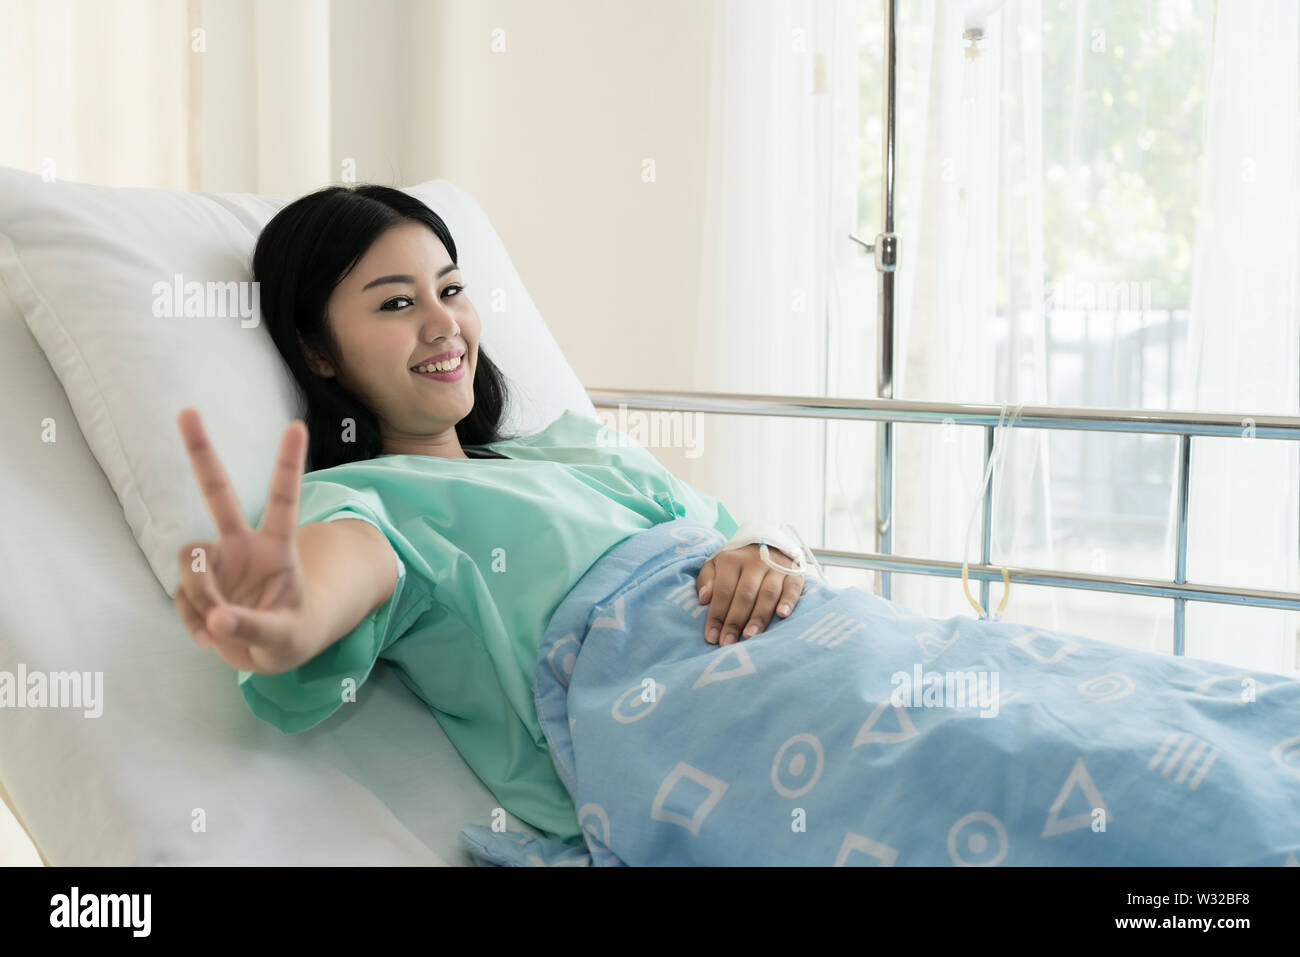 Young Asian patient woman lying at hospital bed with saline drip showing victory sign for cheerful. Drop of saline solution to help patient. Stock Photo